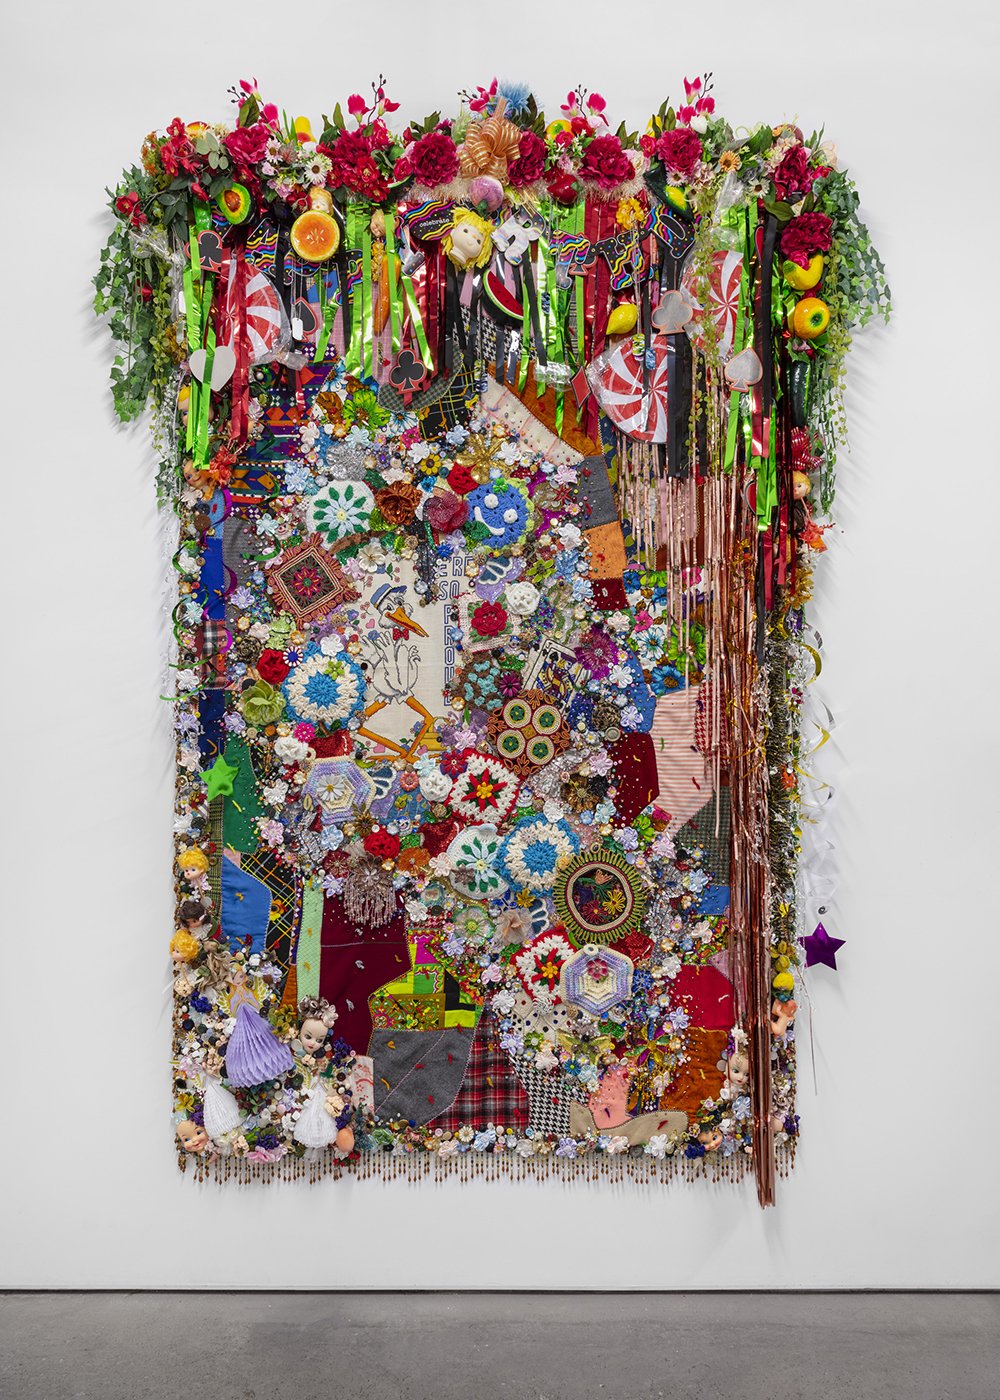   Shroud #7 , 2022, Found ‘Crazy’ quilt ca. 1950, trim, fabric flowers, streamers, banners, garland, crochet pot holders, paper cut-outs, toys, ribbon, costume jewelry, buttons, plastic flowers, fauna, and fruit, beads, sequins, thread, fabric, Dougl